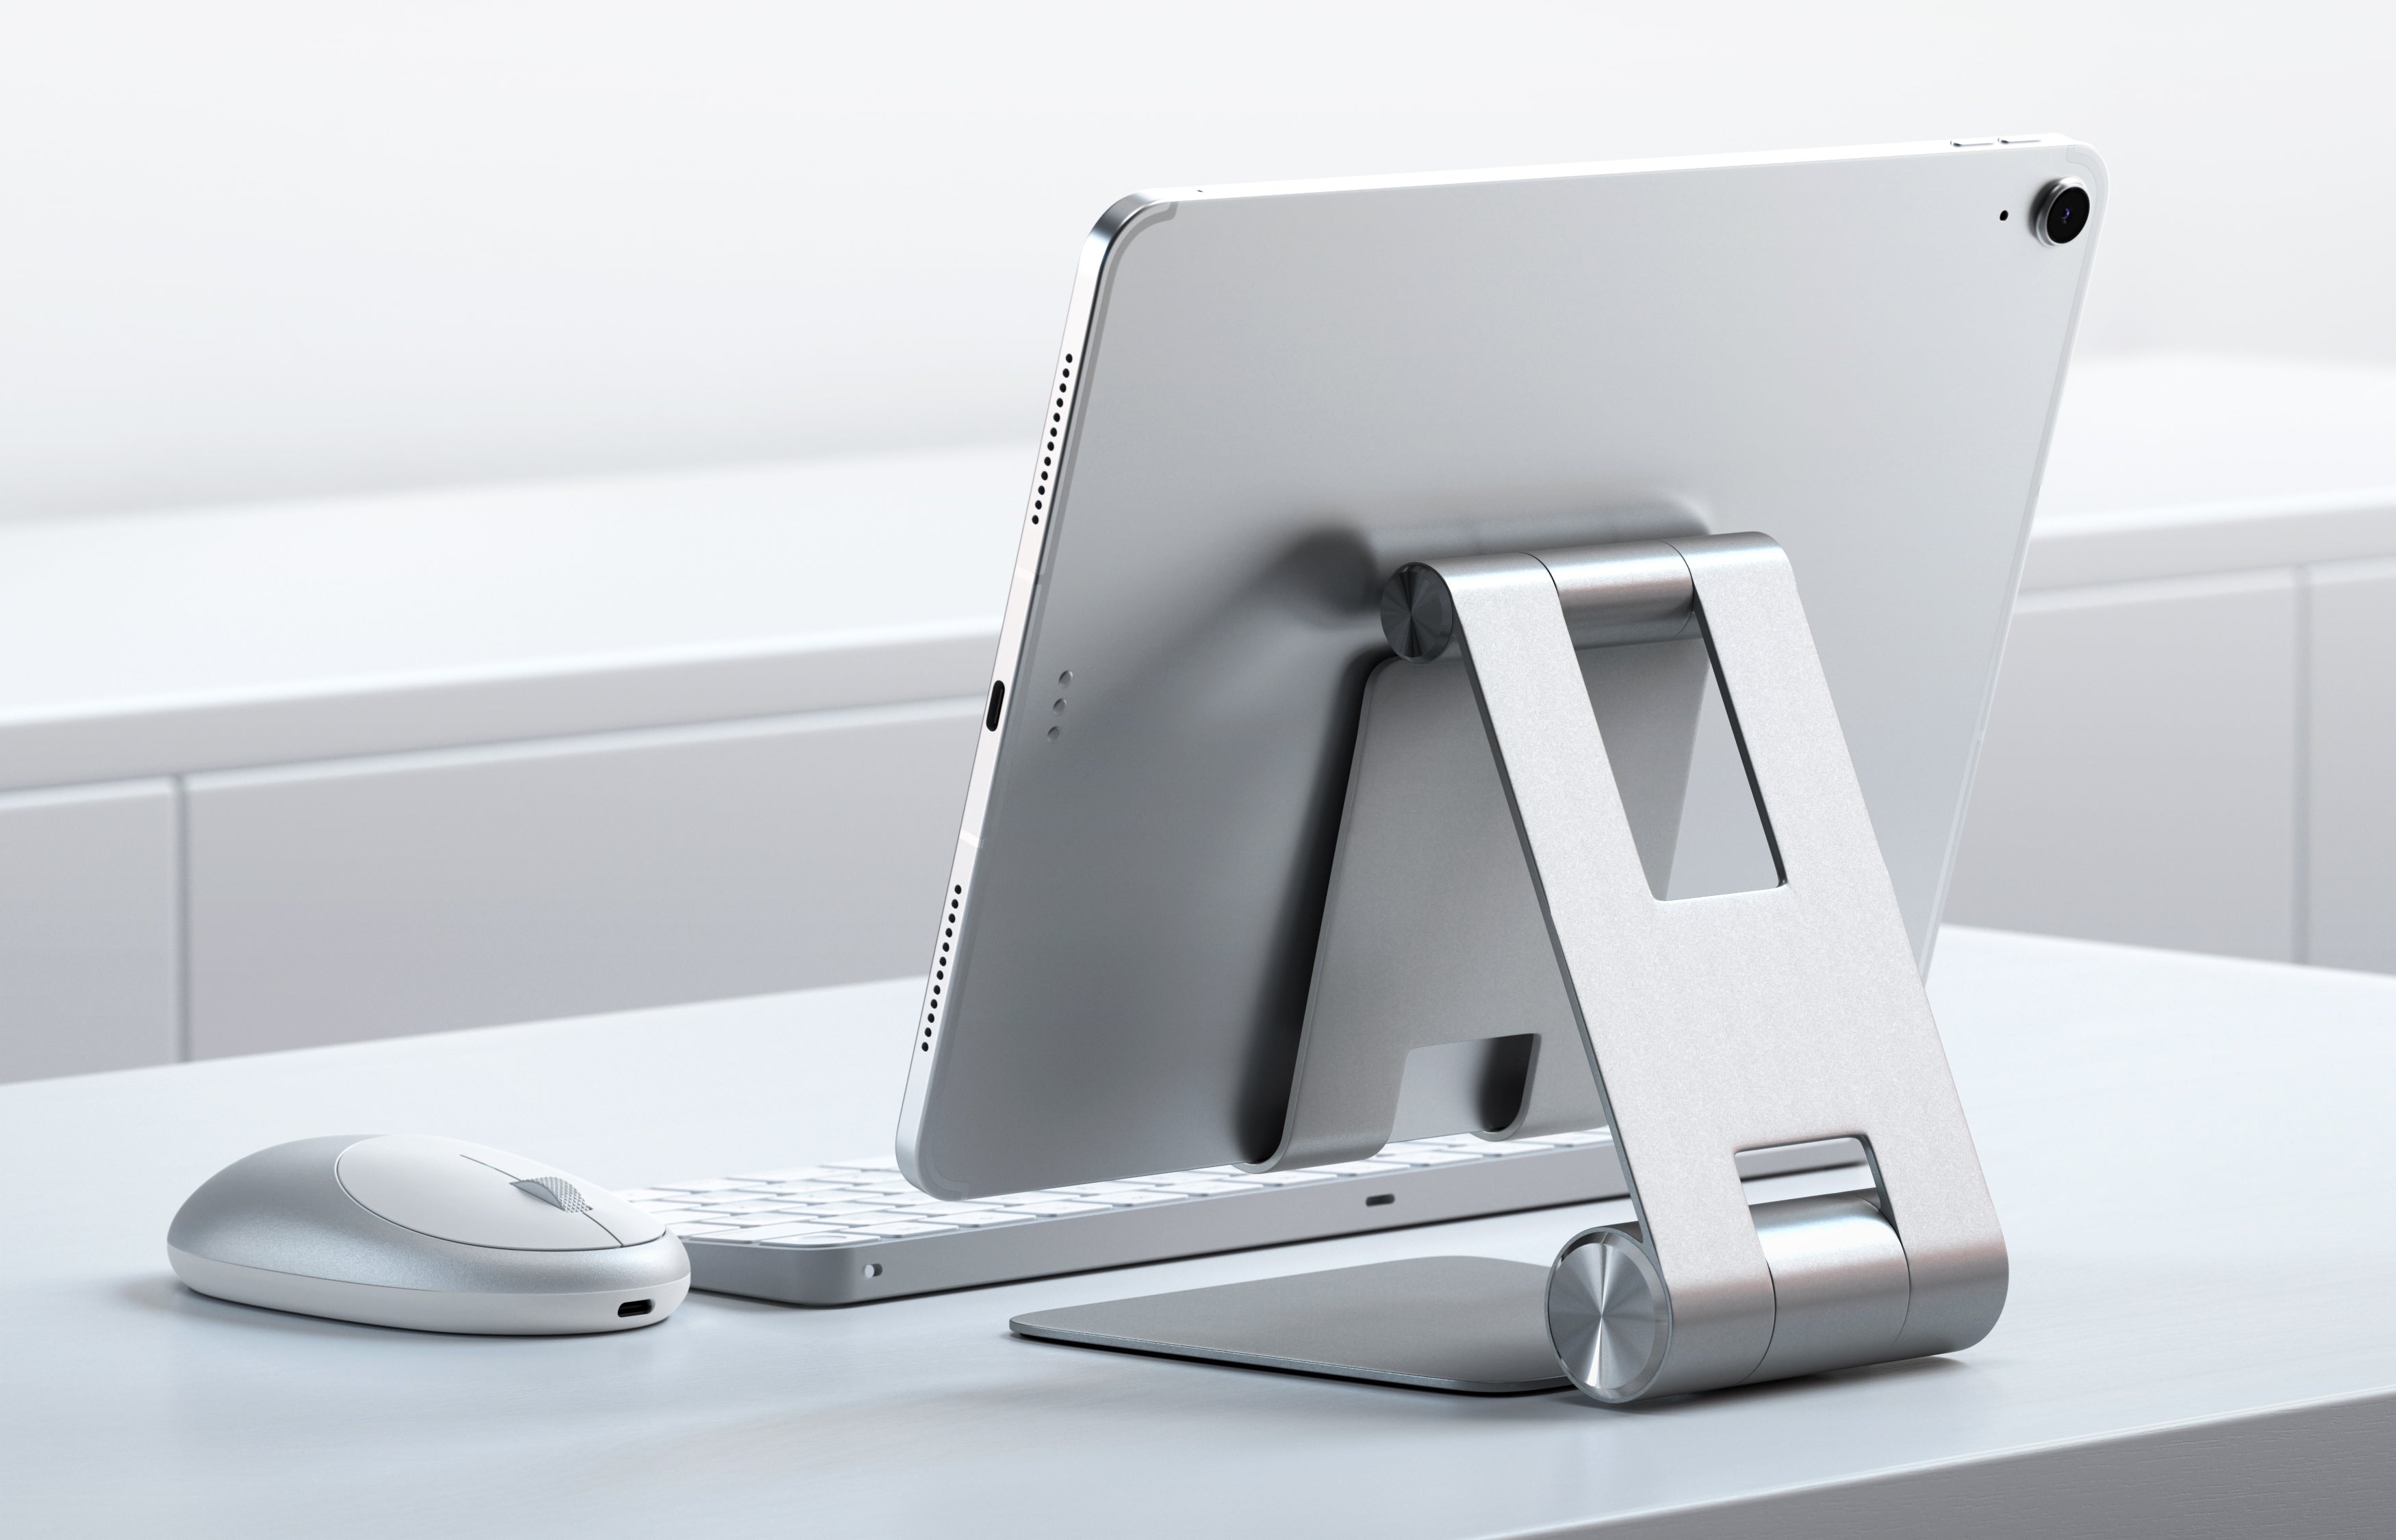 Our updated Satechi R1 stand quickly elevates any mobile device or tablet for an optimal viewing experience. Constructed from solid aluminum, the R1's supporting grips are finished in rubber to hold your tablet without scratching or slipping. It's compatible with most cases too.